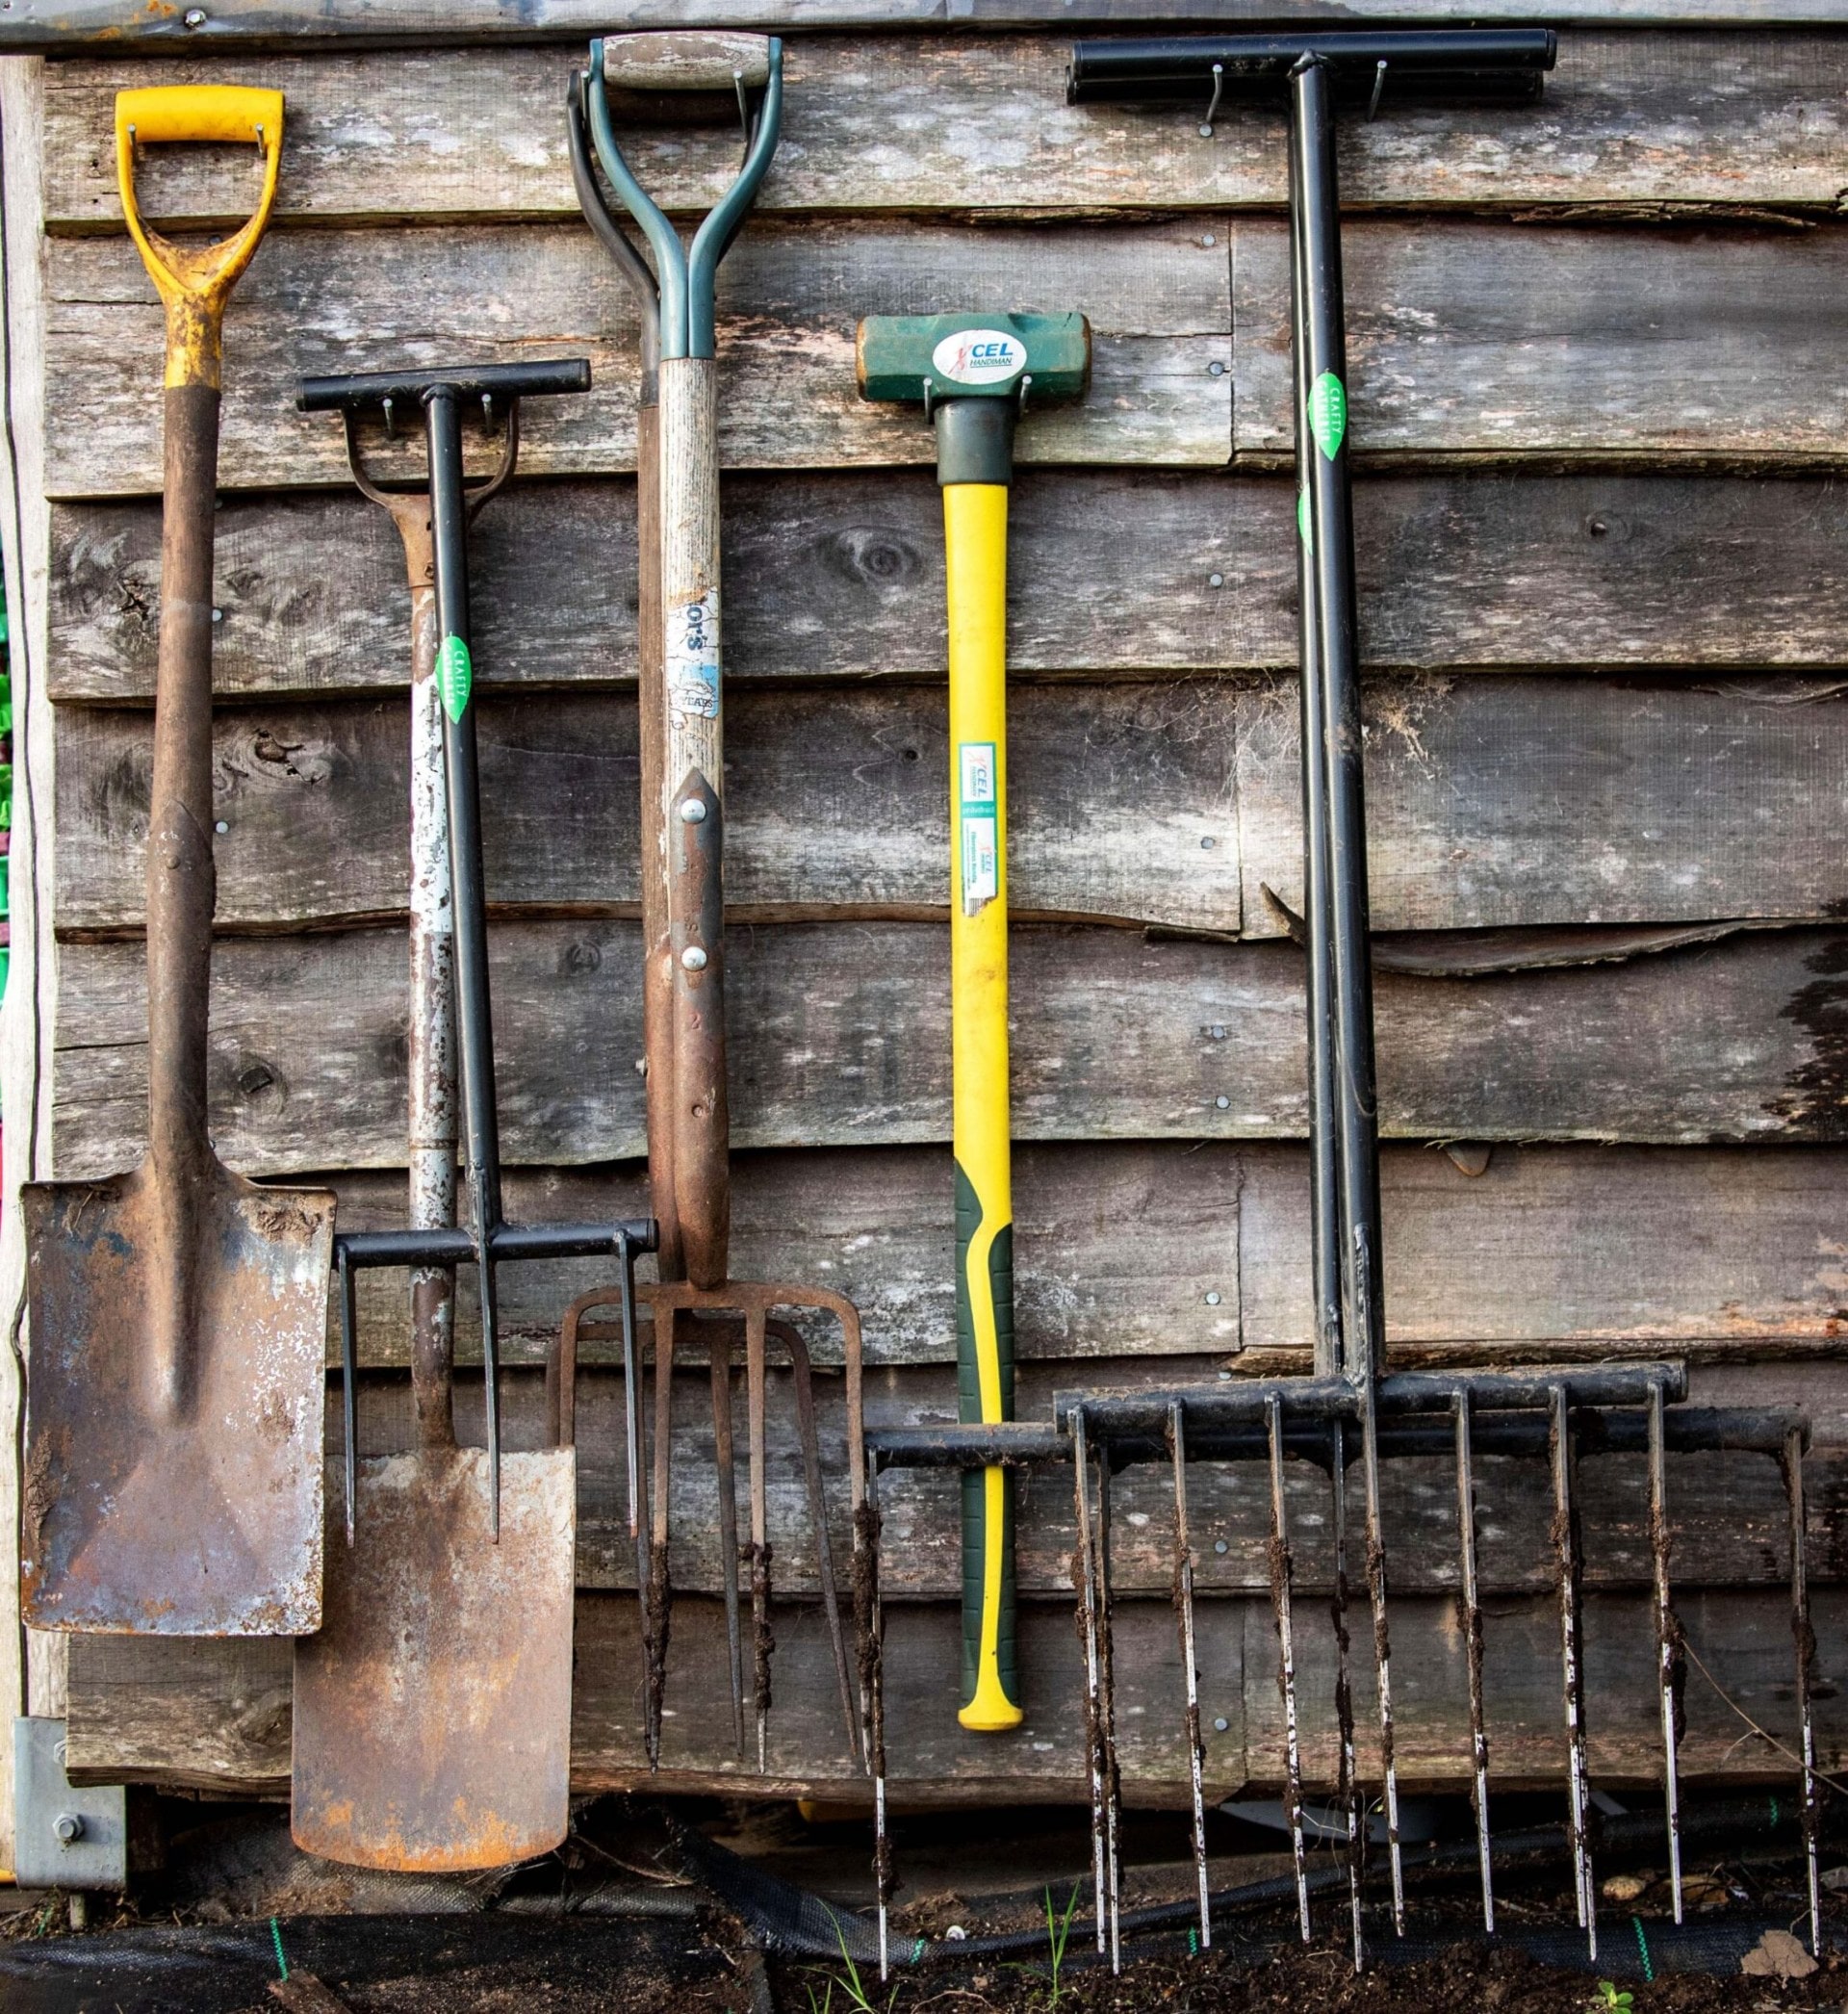 A wood shed with an assortment of garden tools hanging